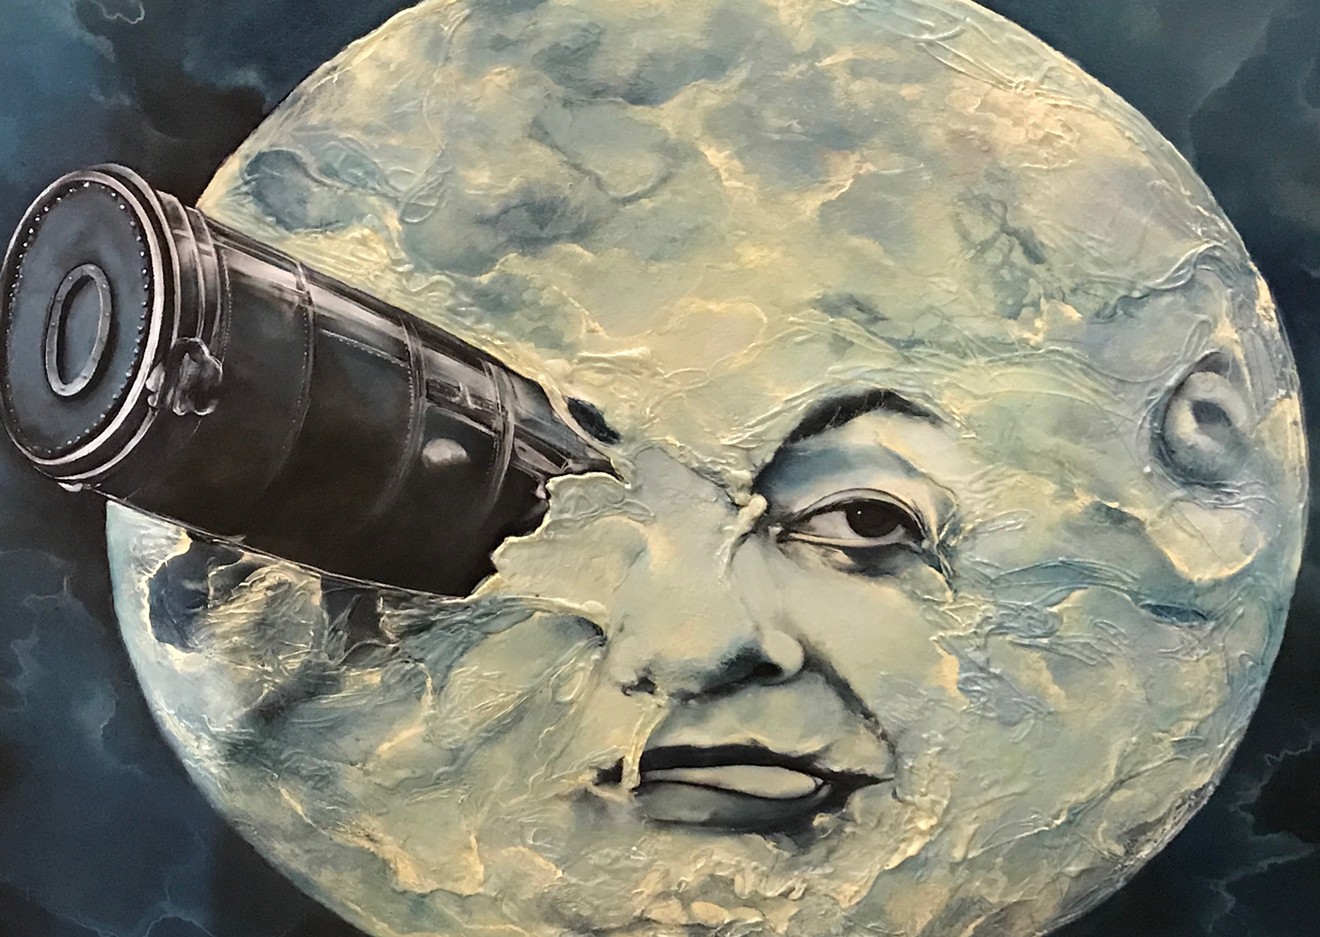 Throwback to Herb Schultz's A Trip to the Moon spotted a while back at Art One gallery.